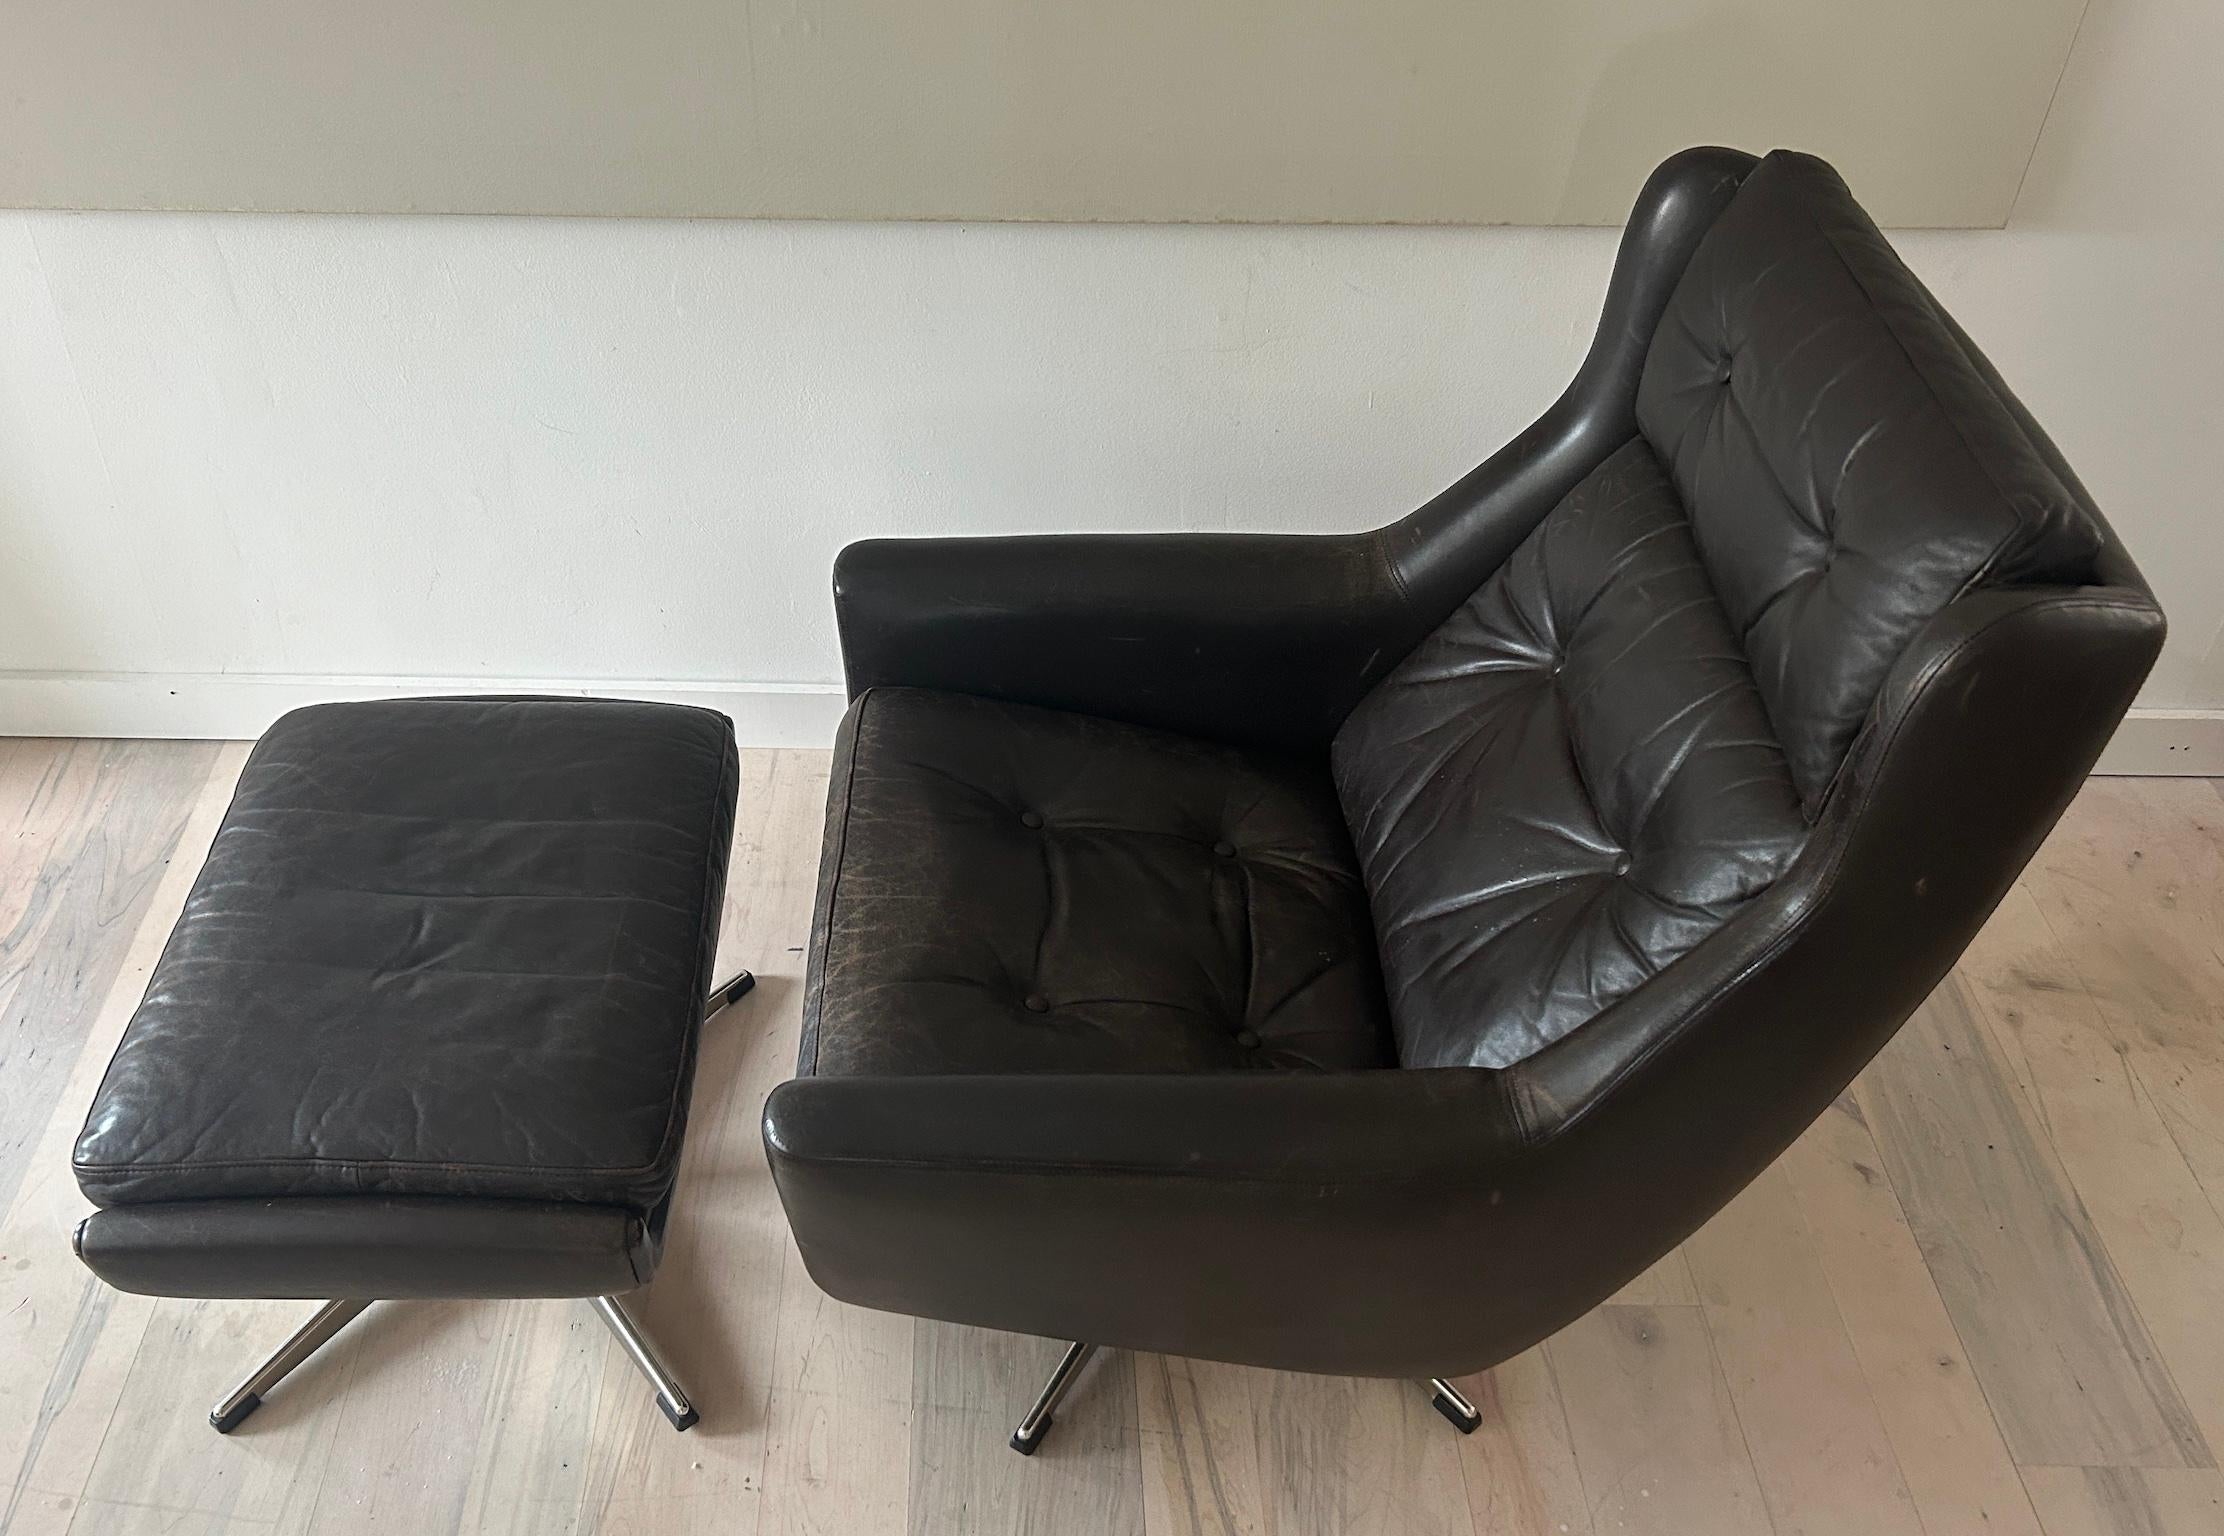 midcentury Danish Modern dark brown leather lounge chair and ottoman by Erhardsen & Anderson ERAN. Danish modern chair and ottoman. Chrome steel bases, removable leather cushions and ottoman with cushion, lounge chair is adjustable allows for